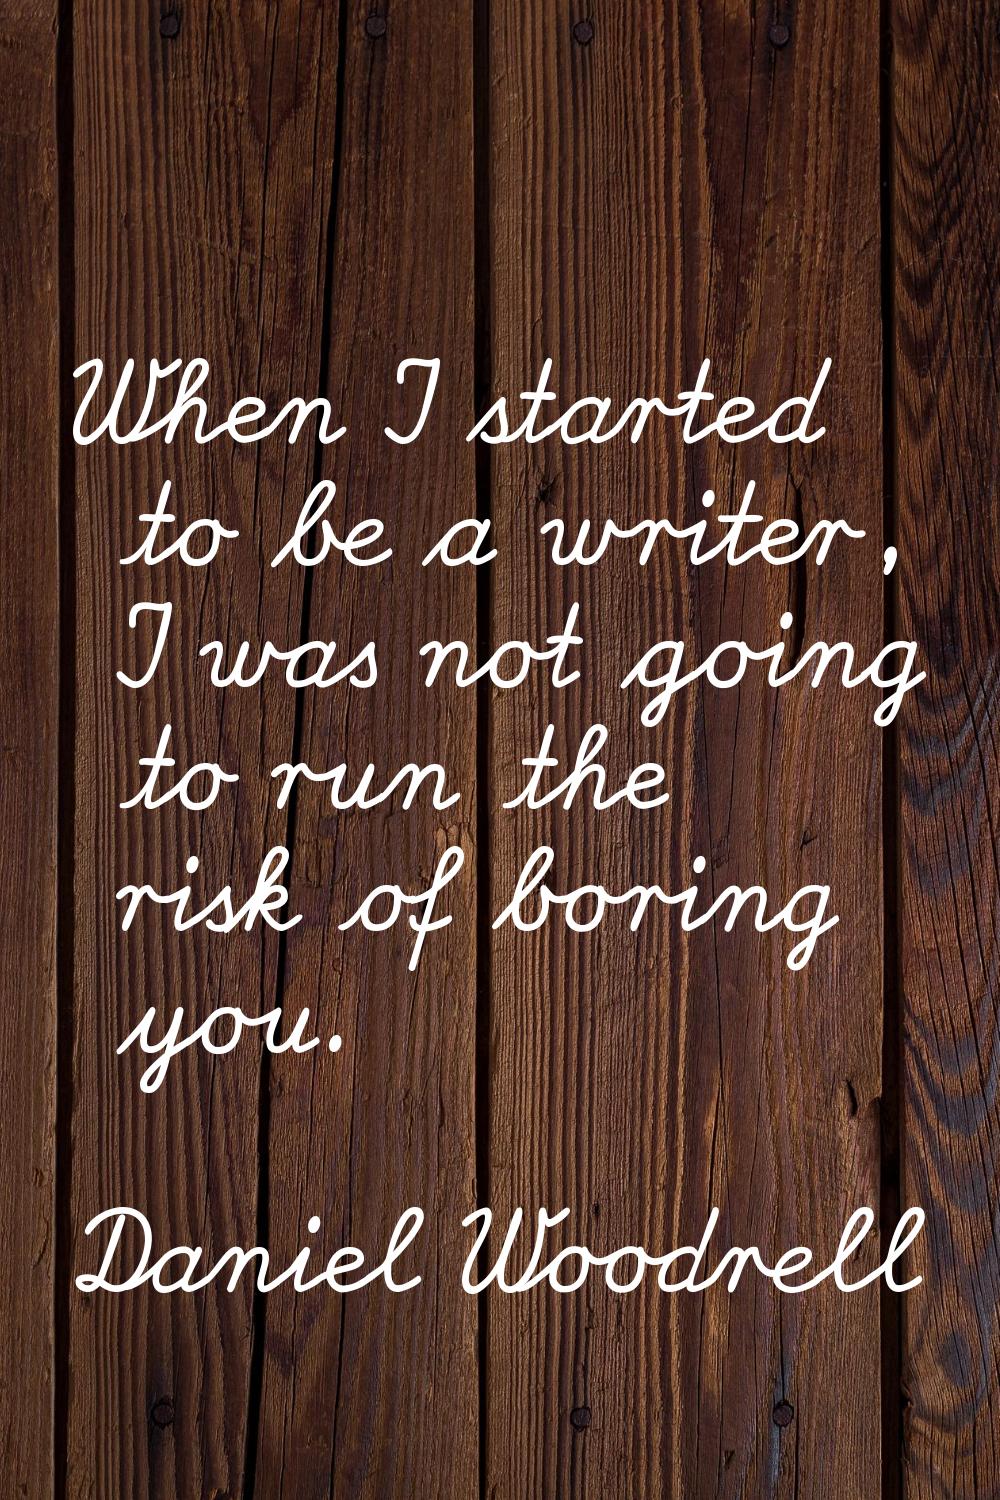 When I started to be a writer, I was not going to run the risk of boring you.